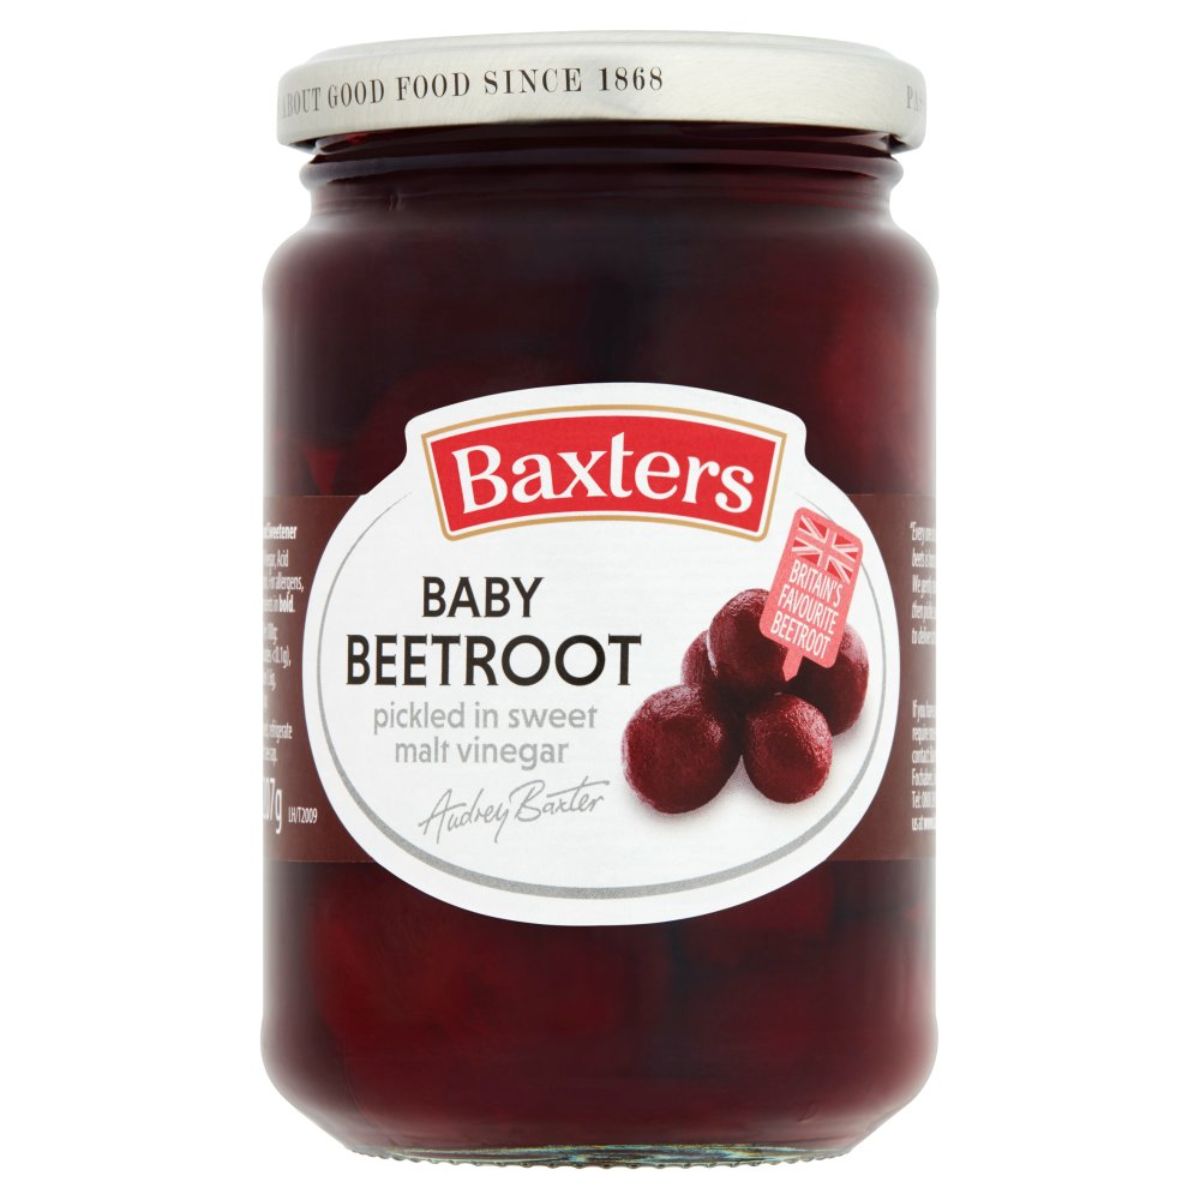 A jar of Baxters - Baby Beetroot - 340g pickled in sweet malt vinegar, pre-cooked for convenience, with a label that states "trusted good food since 1868".